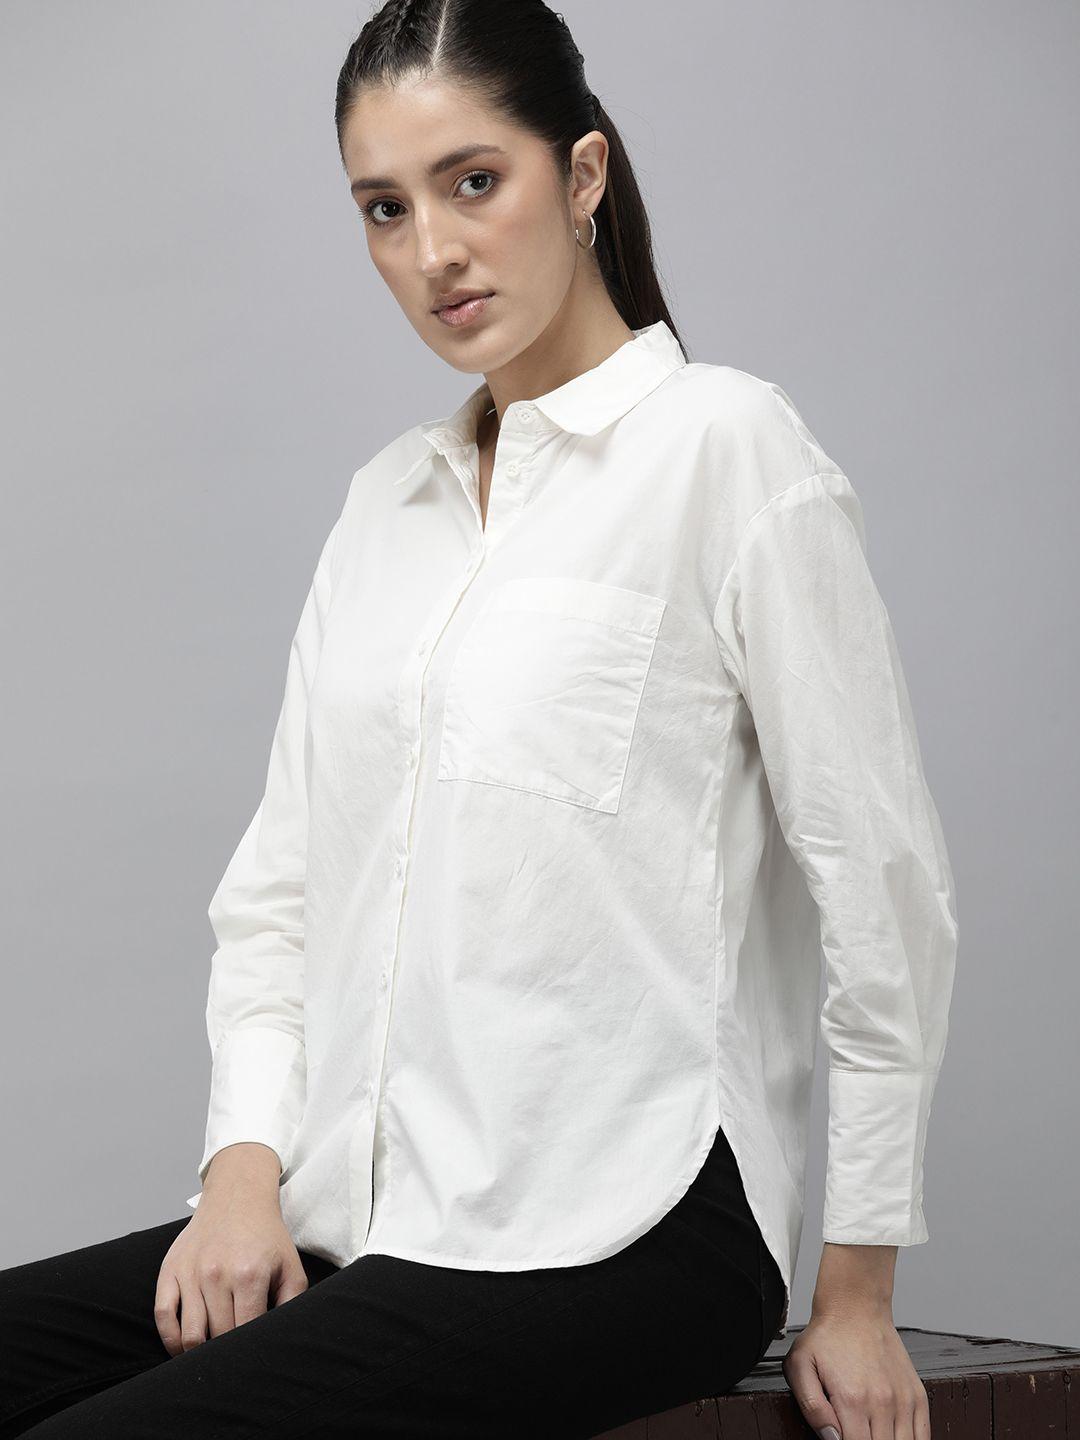 the roadster life co. pure cotton full sleeves casual shirt